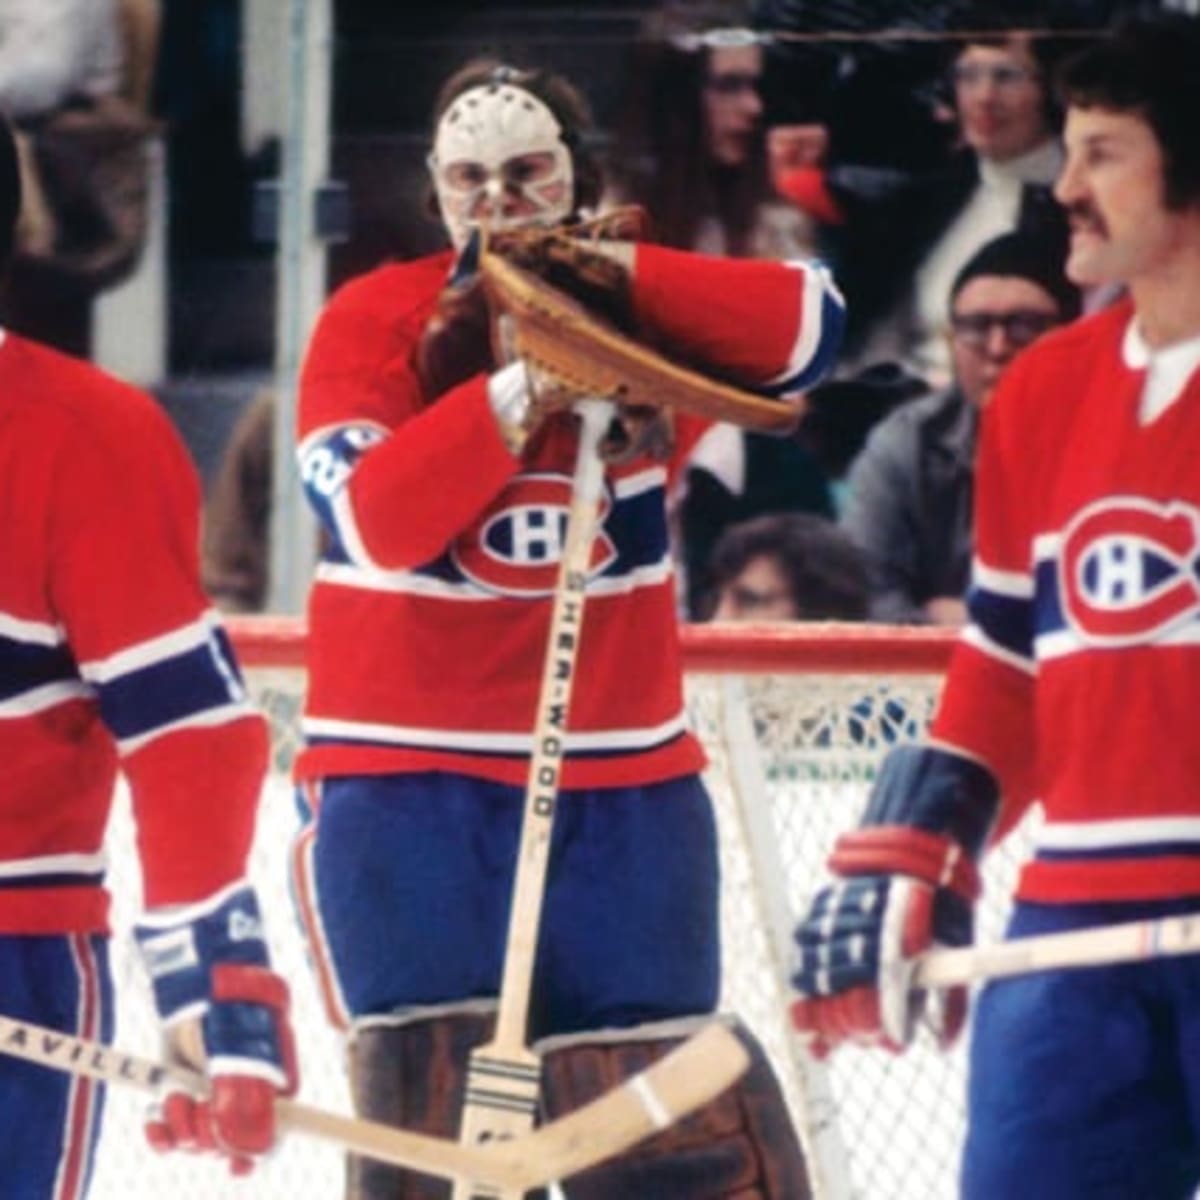 NHL Stanley Montreal Canadiens: What are the original 6 NHL teams